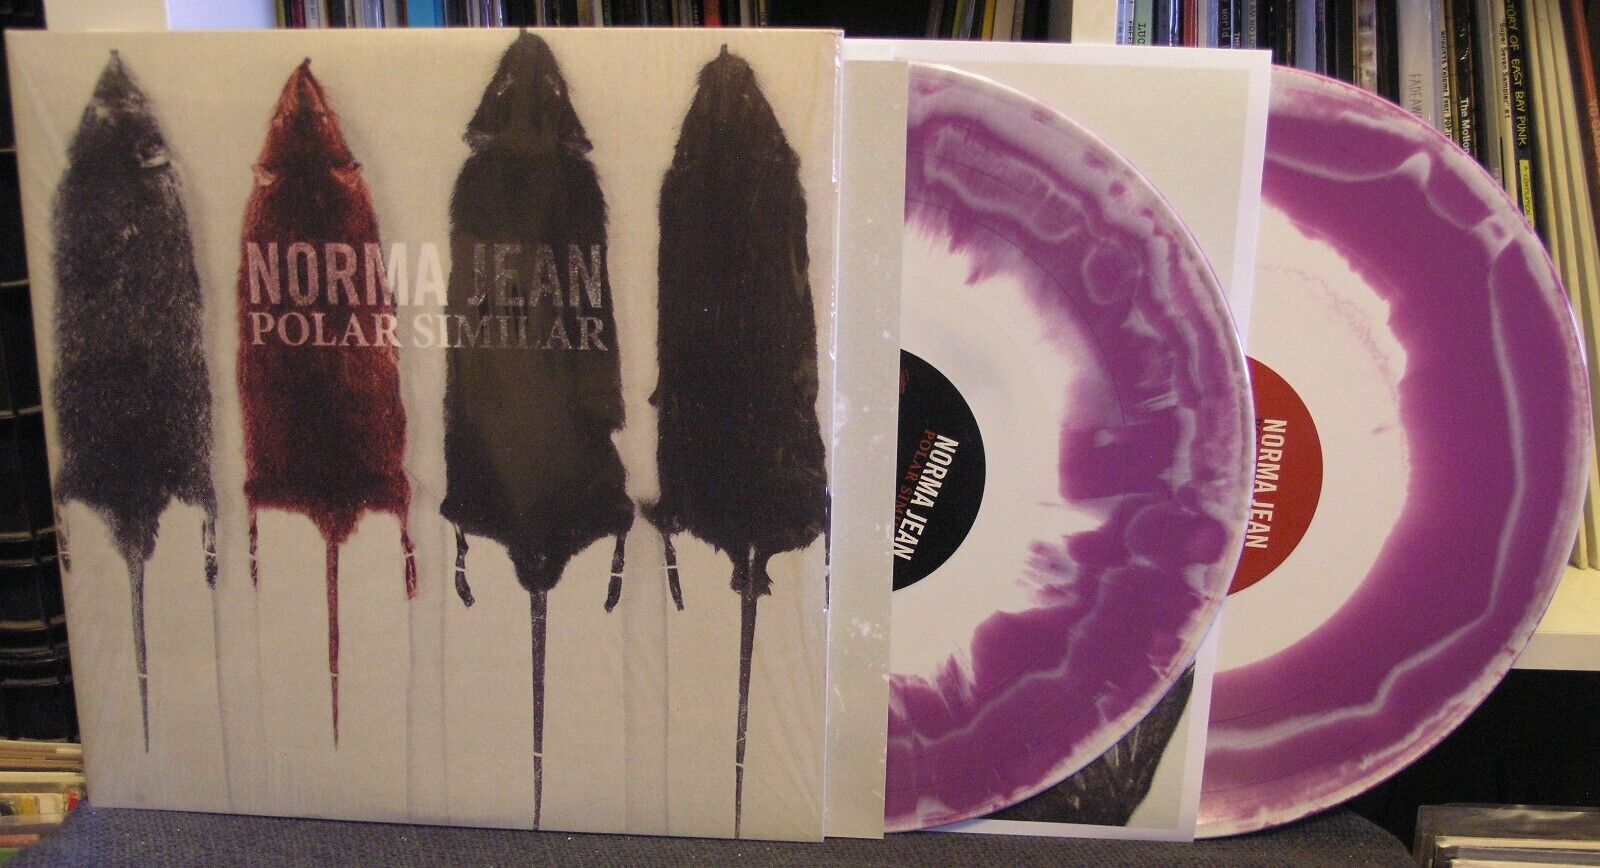 Norma Jean "Polar Similar" 2x LP NM OOP The Chariot Underoath August Burns Red